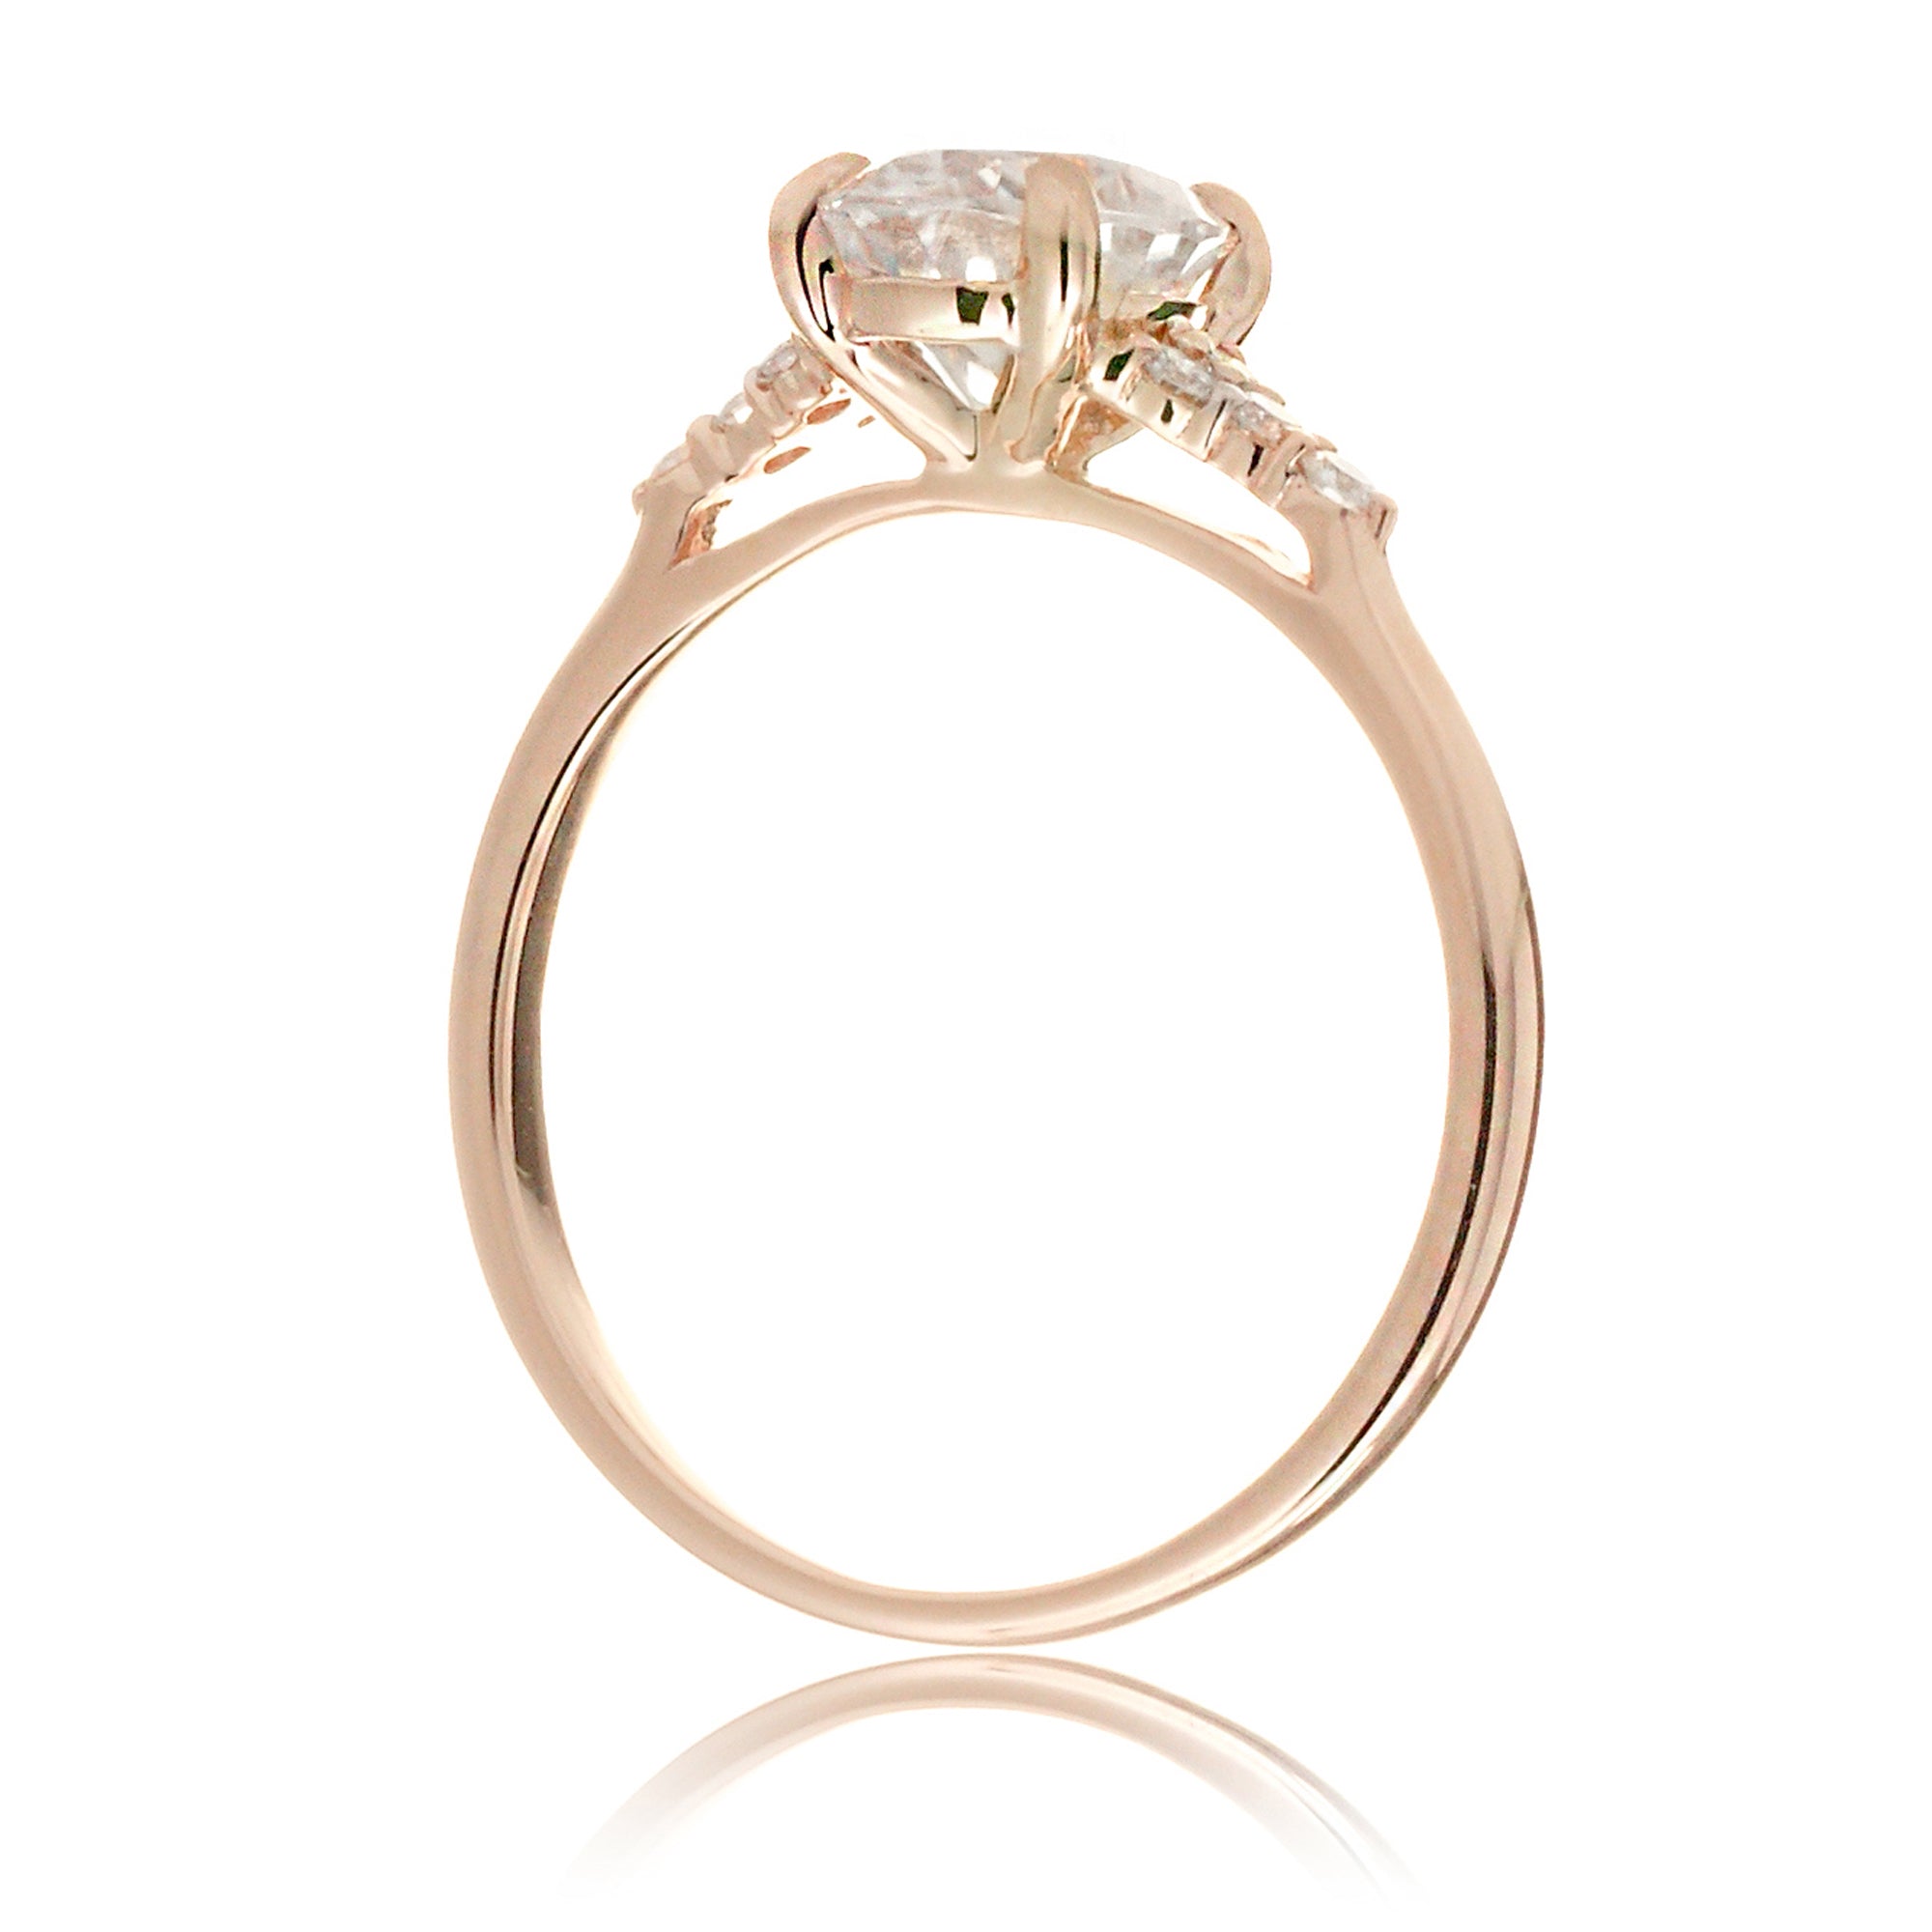  Pear moissanite ring with diamond accent on rose gold - the Chloe